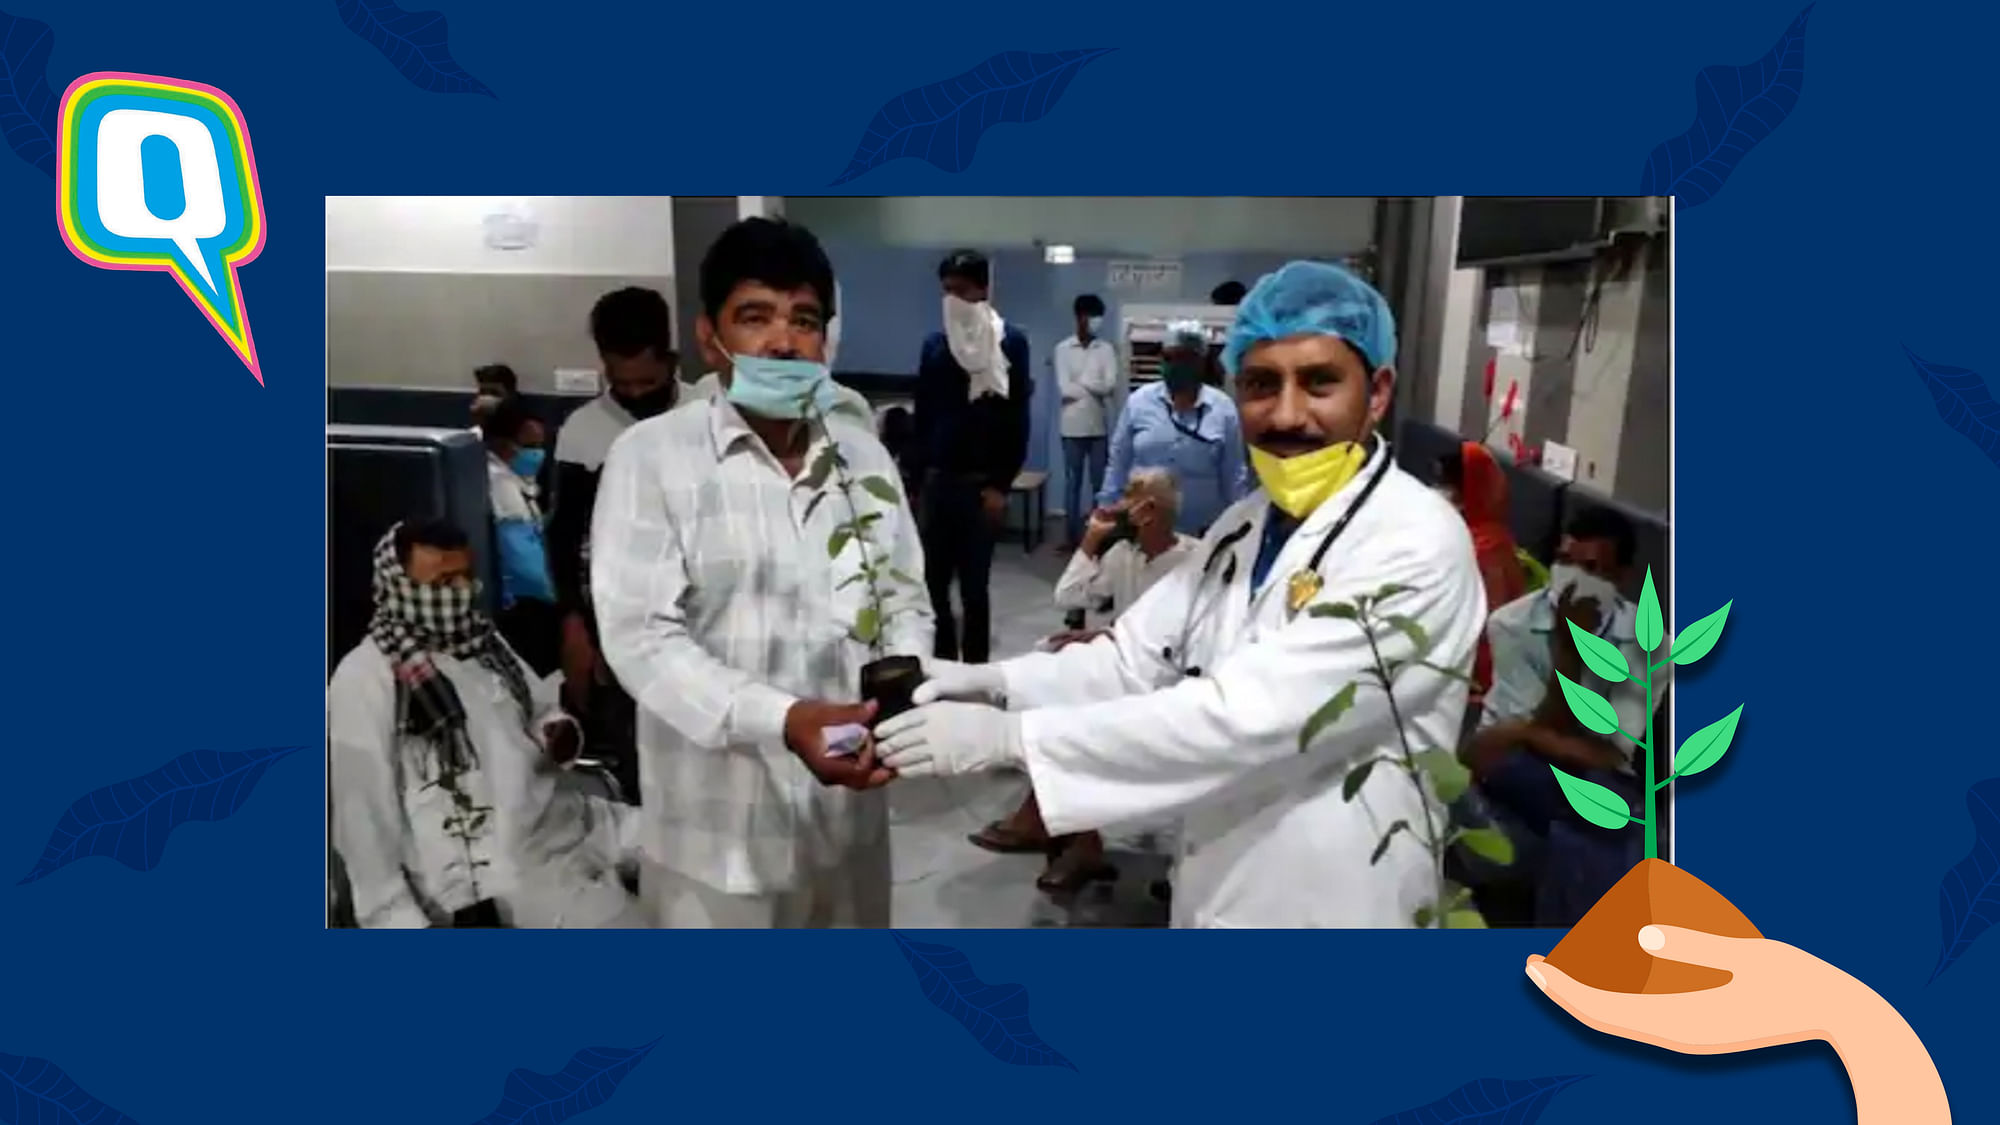 Dr CP Singh handing out potted plants to his patients on World Environment Day 2020